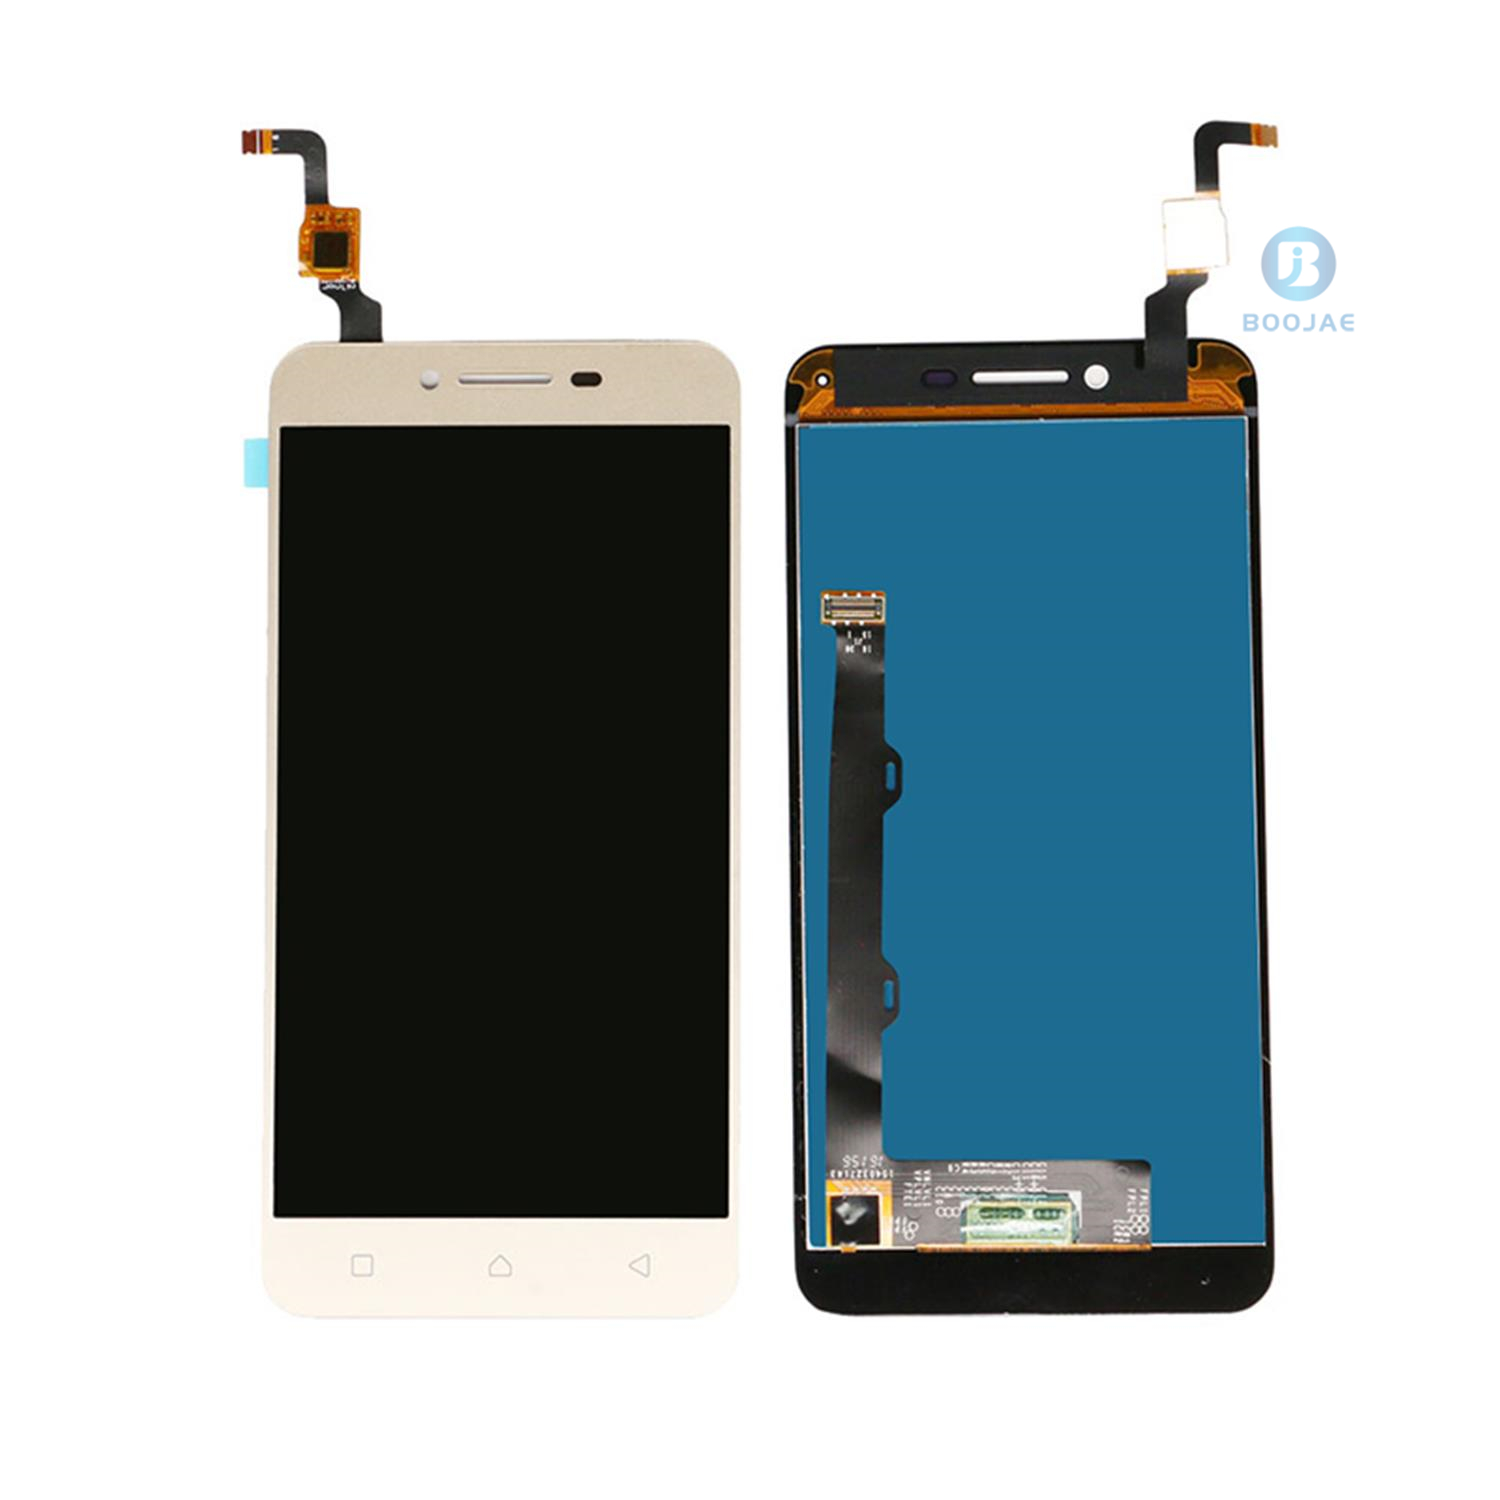 For Lenovo Vibe K5 Plus LCD Screen Display and Touch Panel Digitizer Assembly Replacement